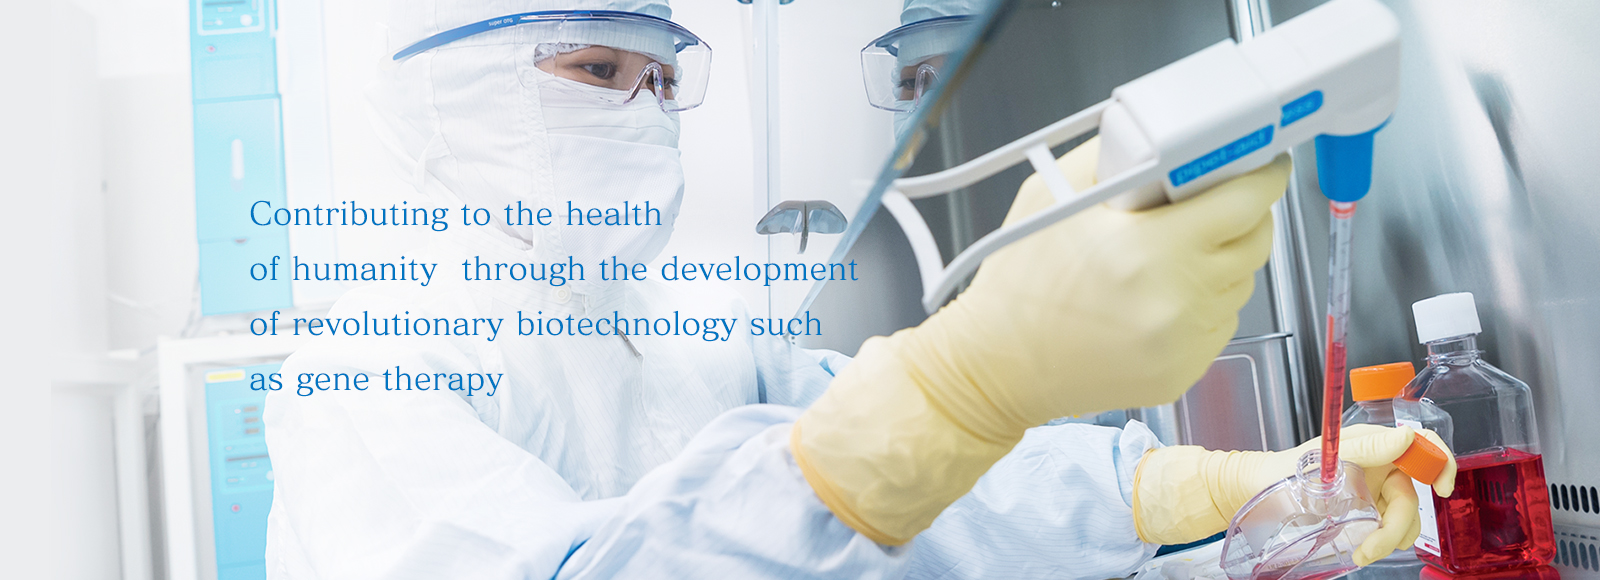 Contributing to the health of humanity through the development of revolutionary biotechnology such as gene therapy